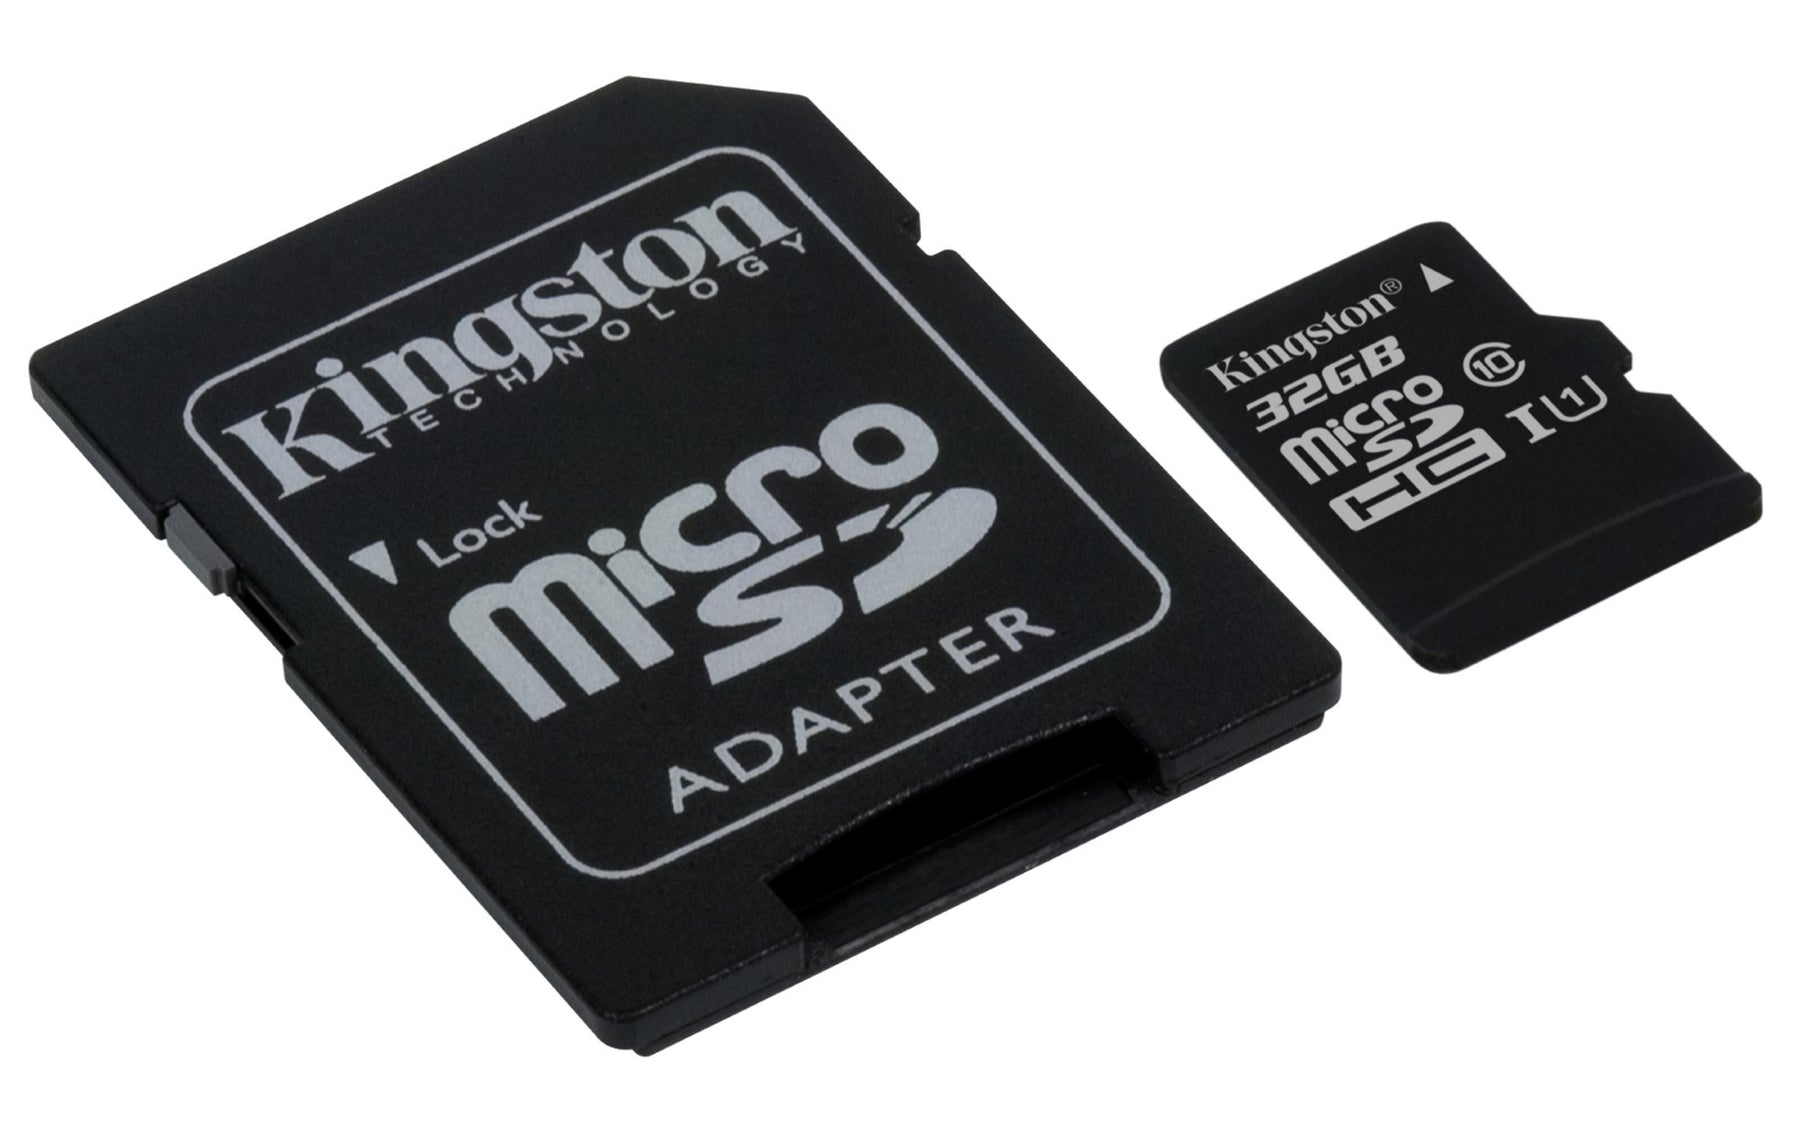 Kingston Canvas Select 32GB microSDHC Class 10 microSD Memory Card UHS-I 80MB/s R Flash Memory Card with Adapter MSD32GB (SDCS/32GB)